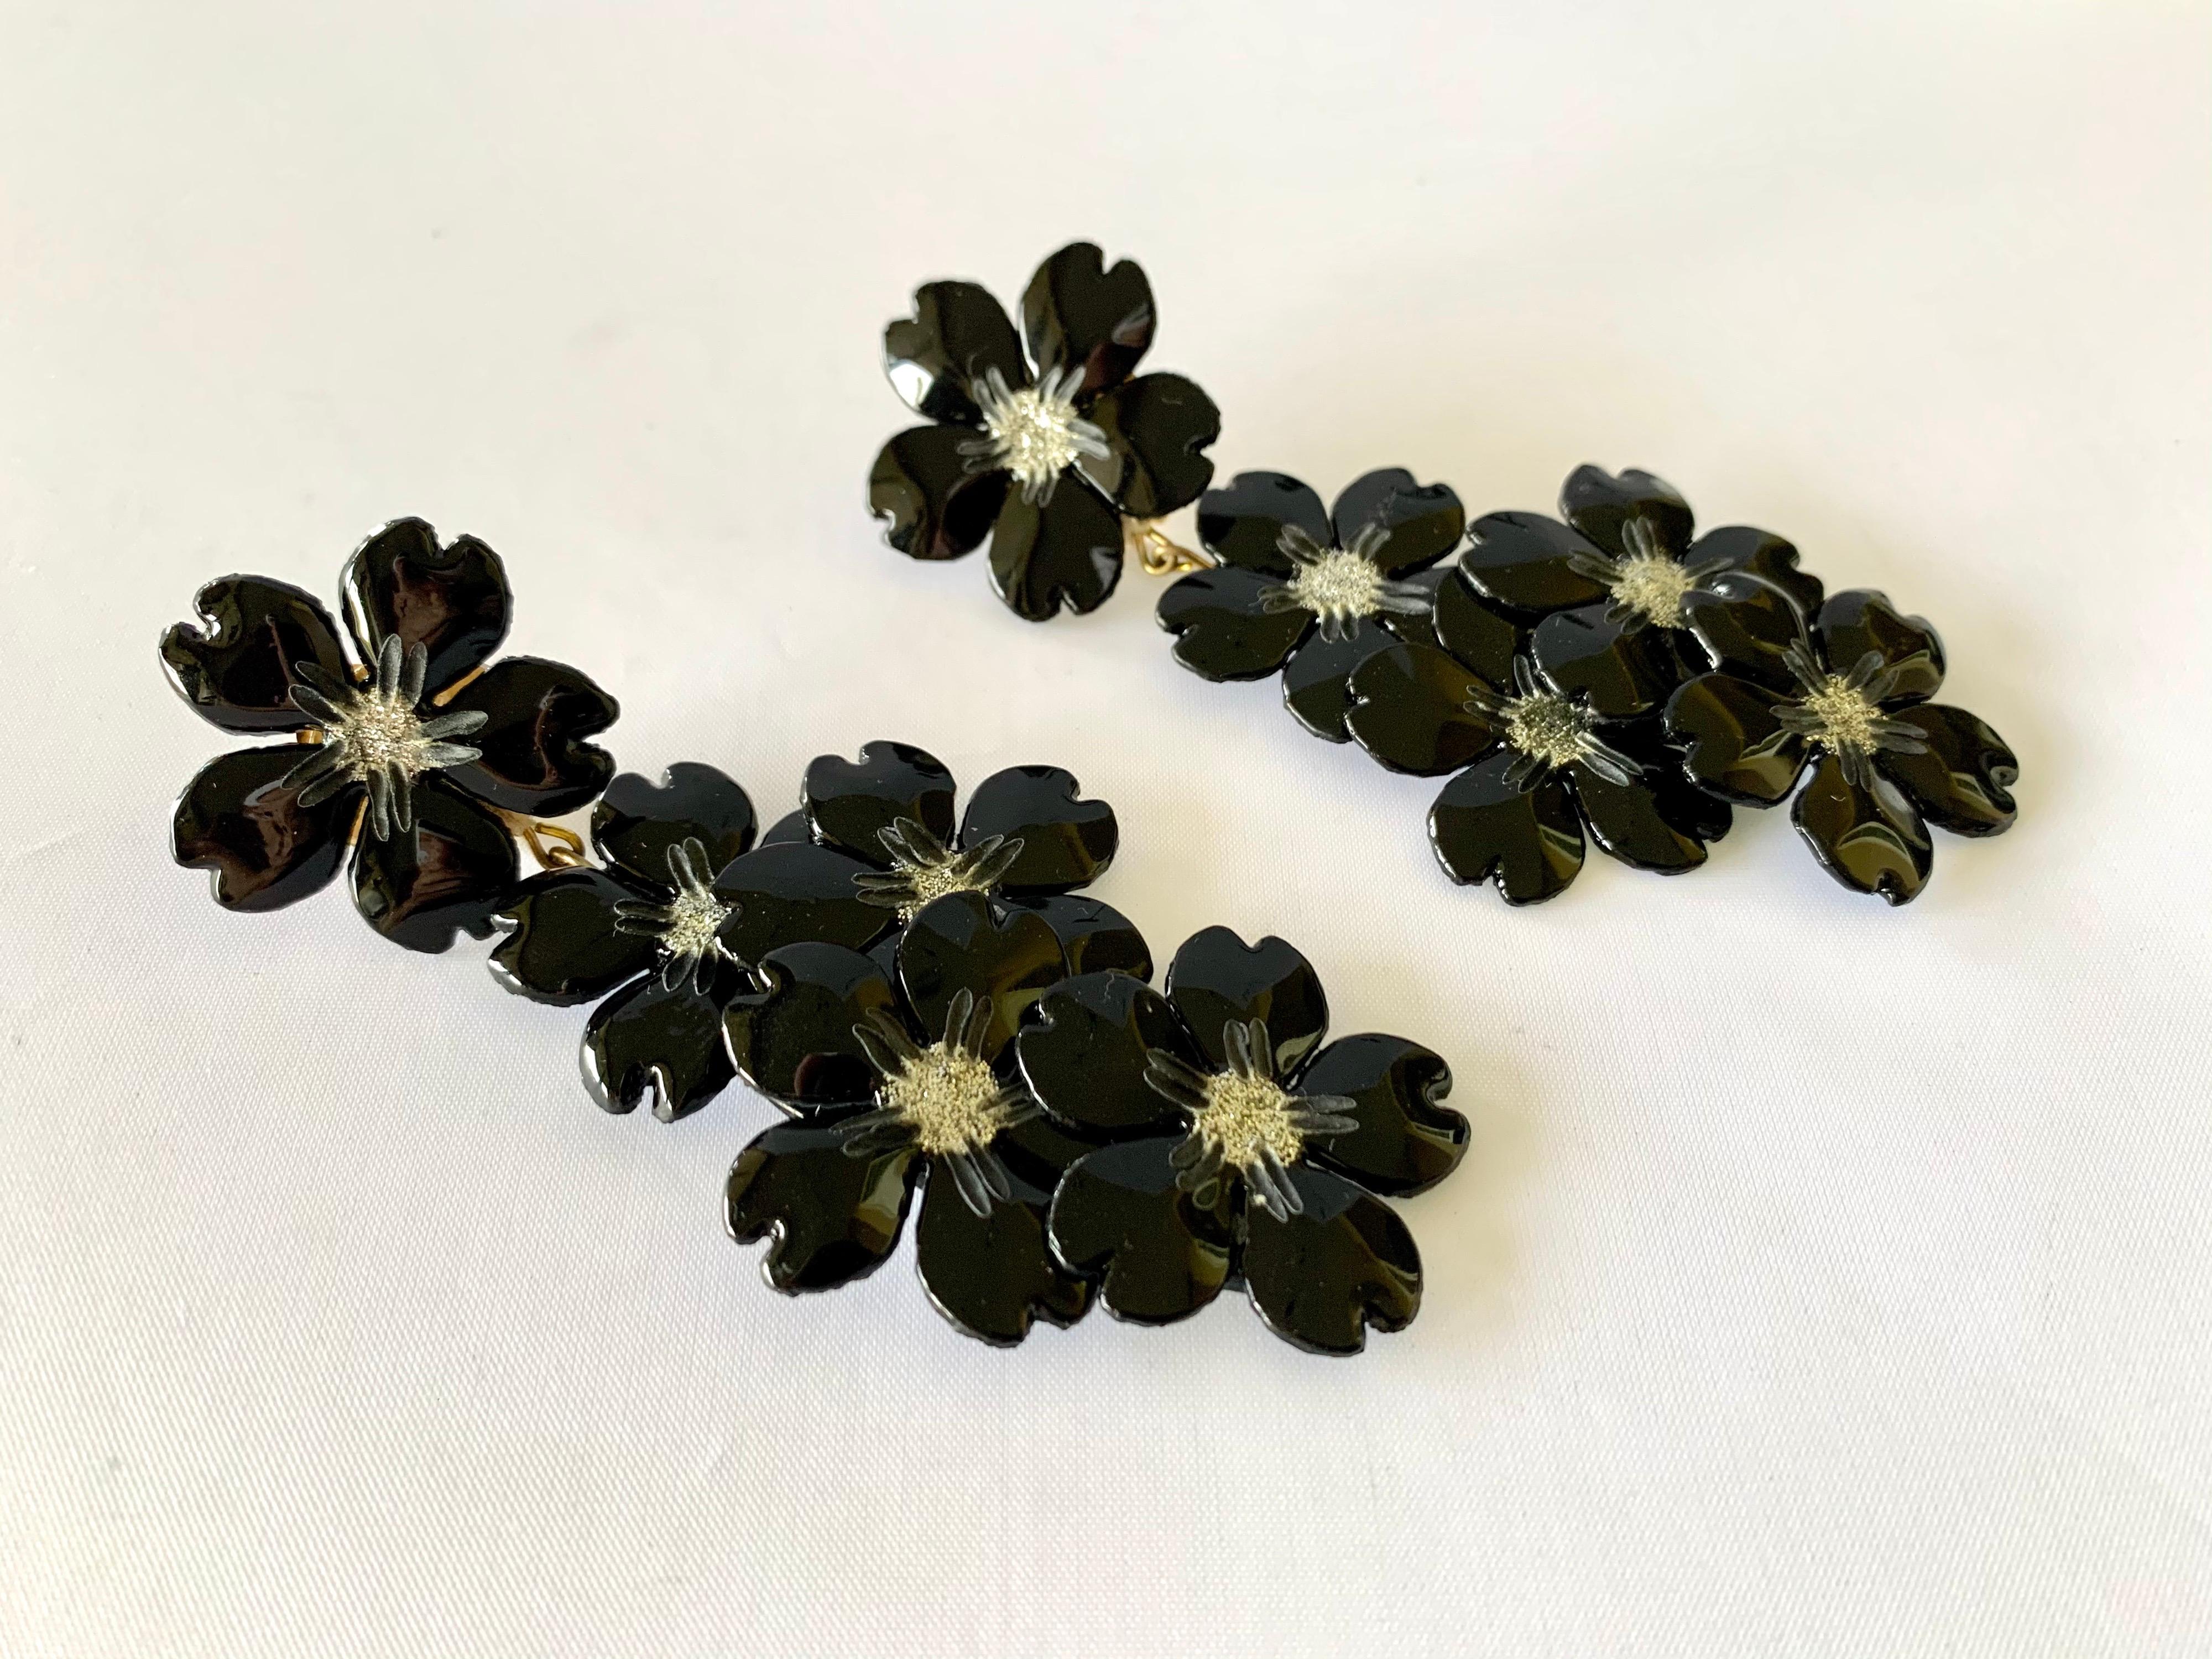 Women's Contemporary Black and Silver Flower Chandelier Statement Earrings